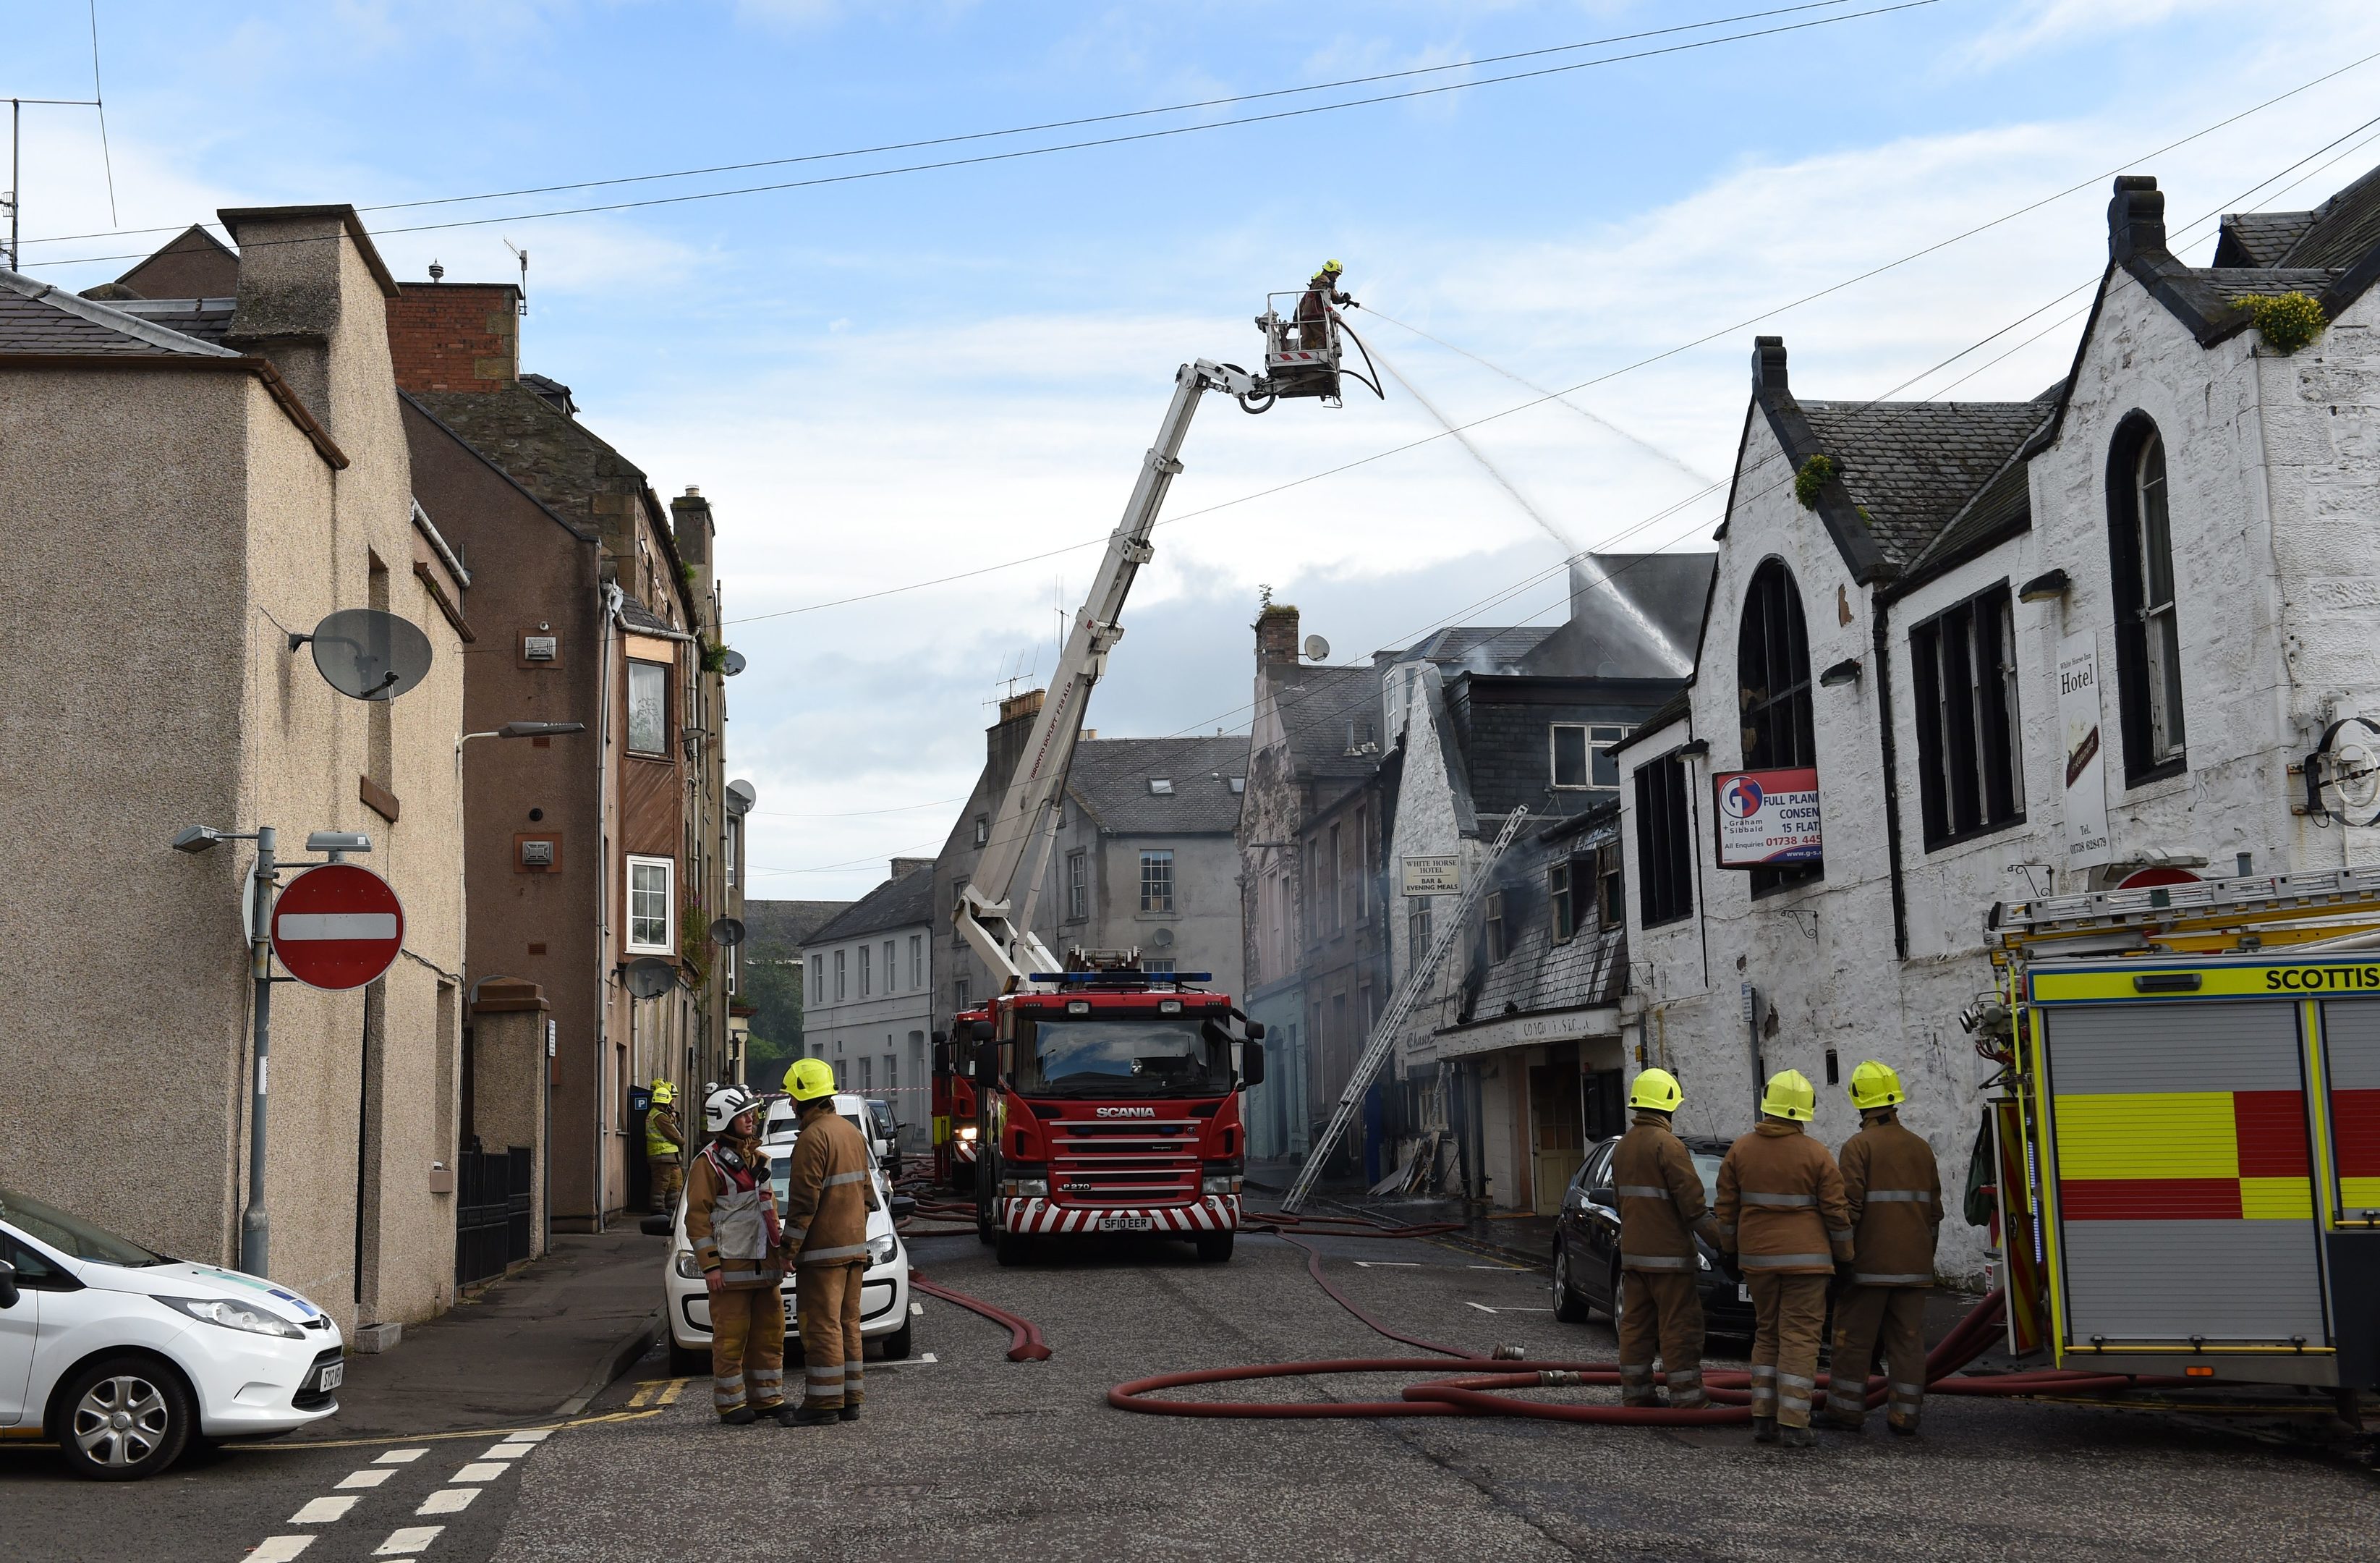 The fire at the White Horse Inn.